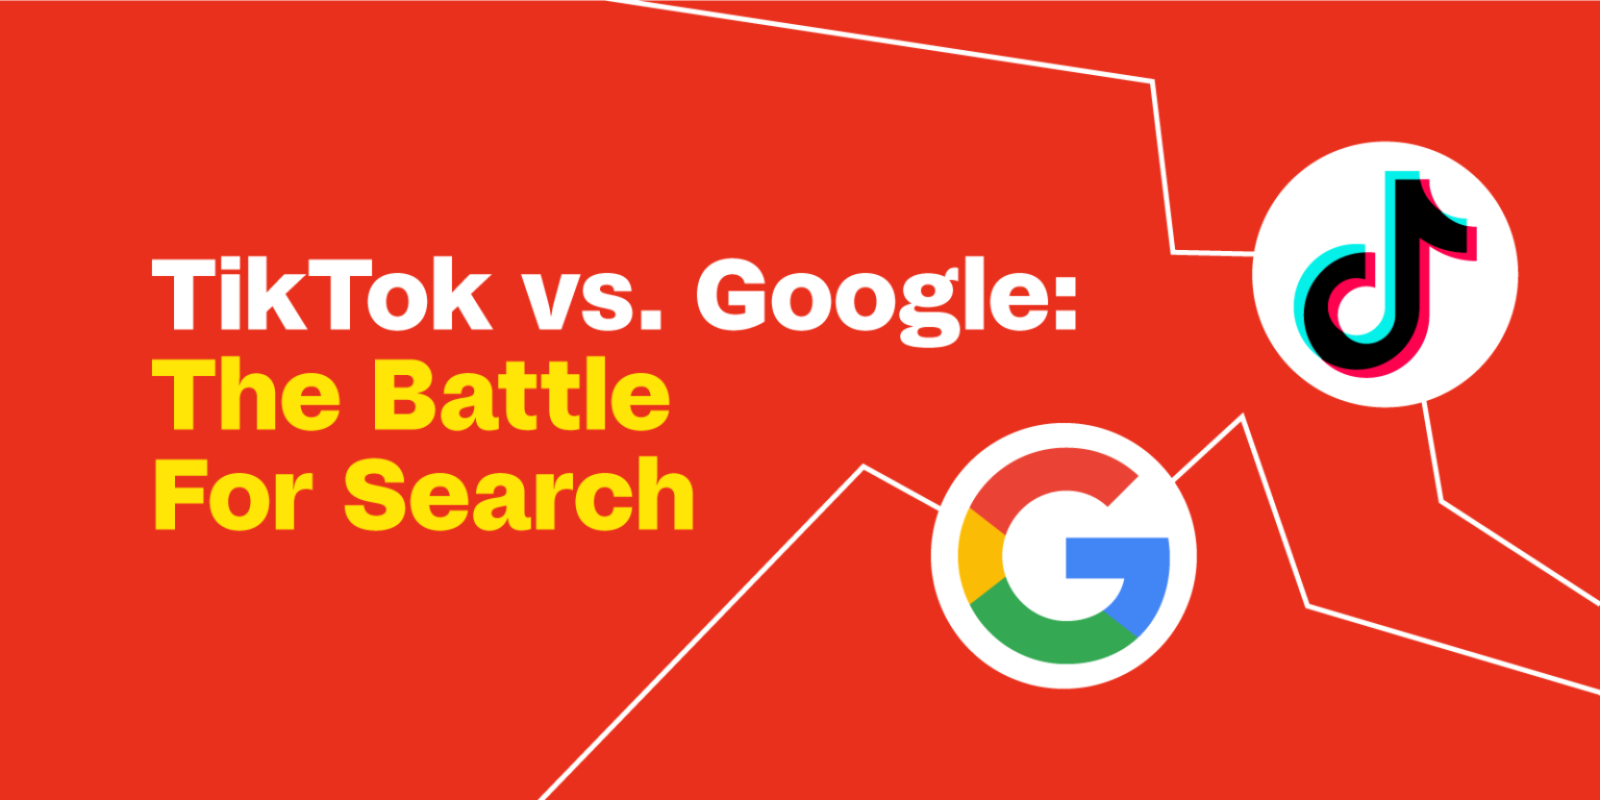 Battle for Search: Is Google Losing to TikTok?